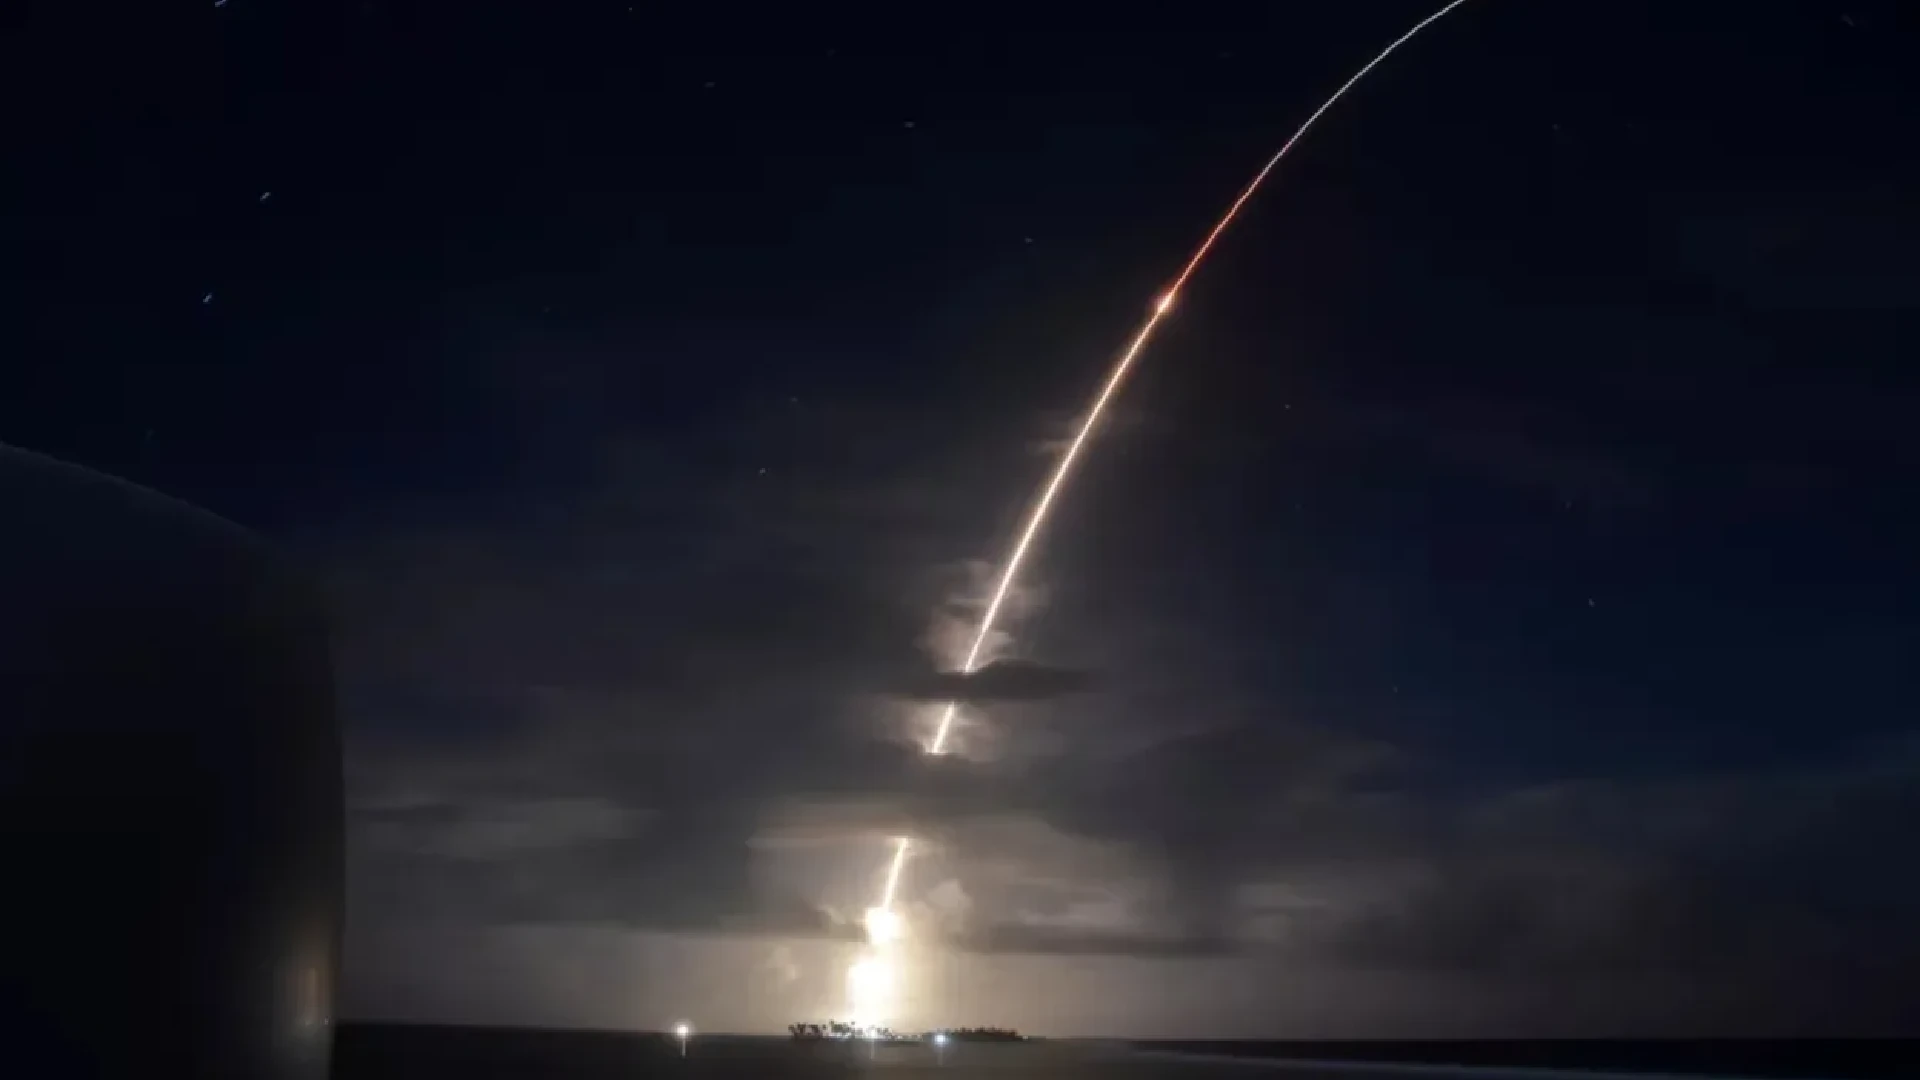 Minotaur II+ Rocket Explodes in Seconds After Launching At California Vandenberg Space Force